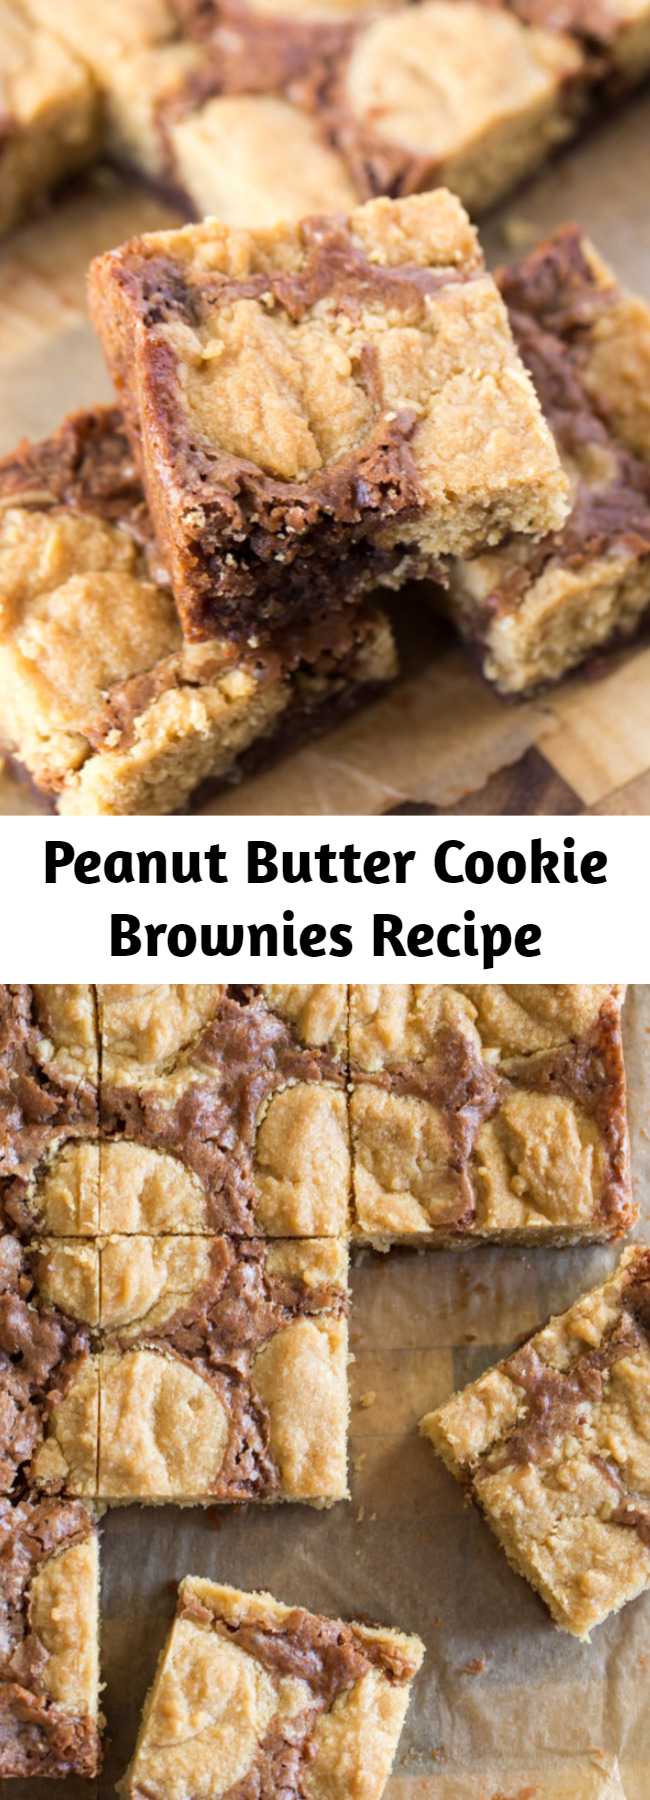 Peanut Butter Cookie Brownies Recipe - An easy homemade brownie batter studded with globs of peanut butter cookie dough for a chocolate peanut butter lovers dream come true. These little squares did NOT last long my friends.